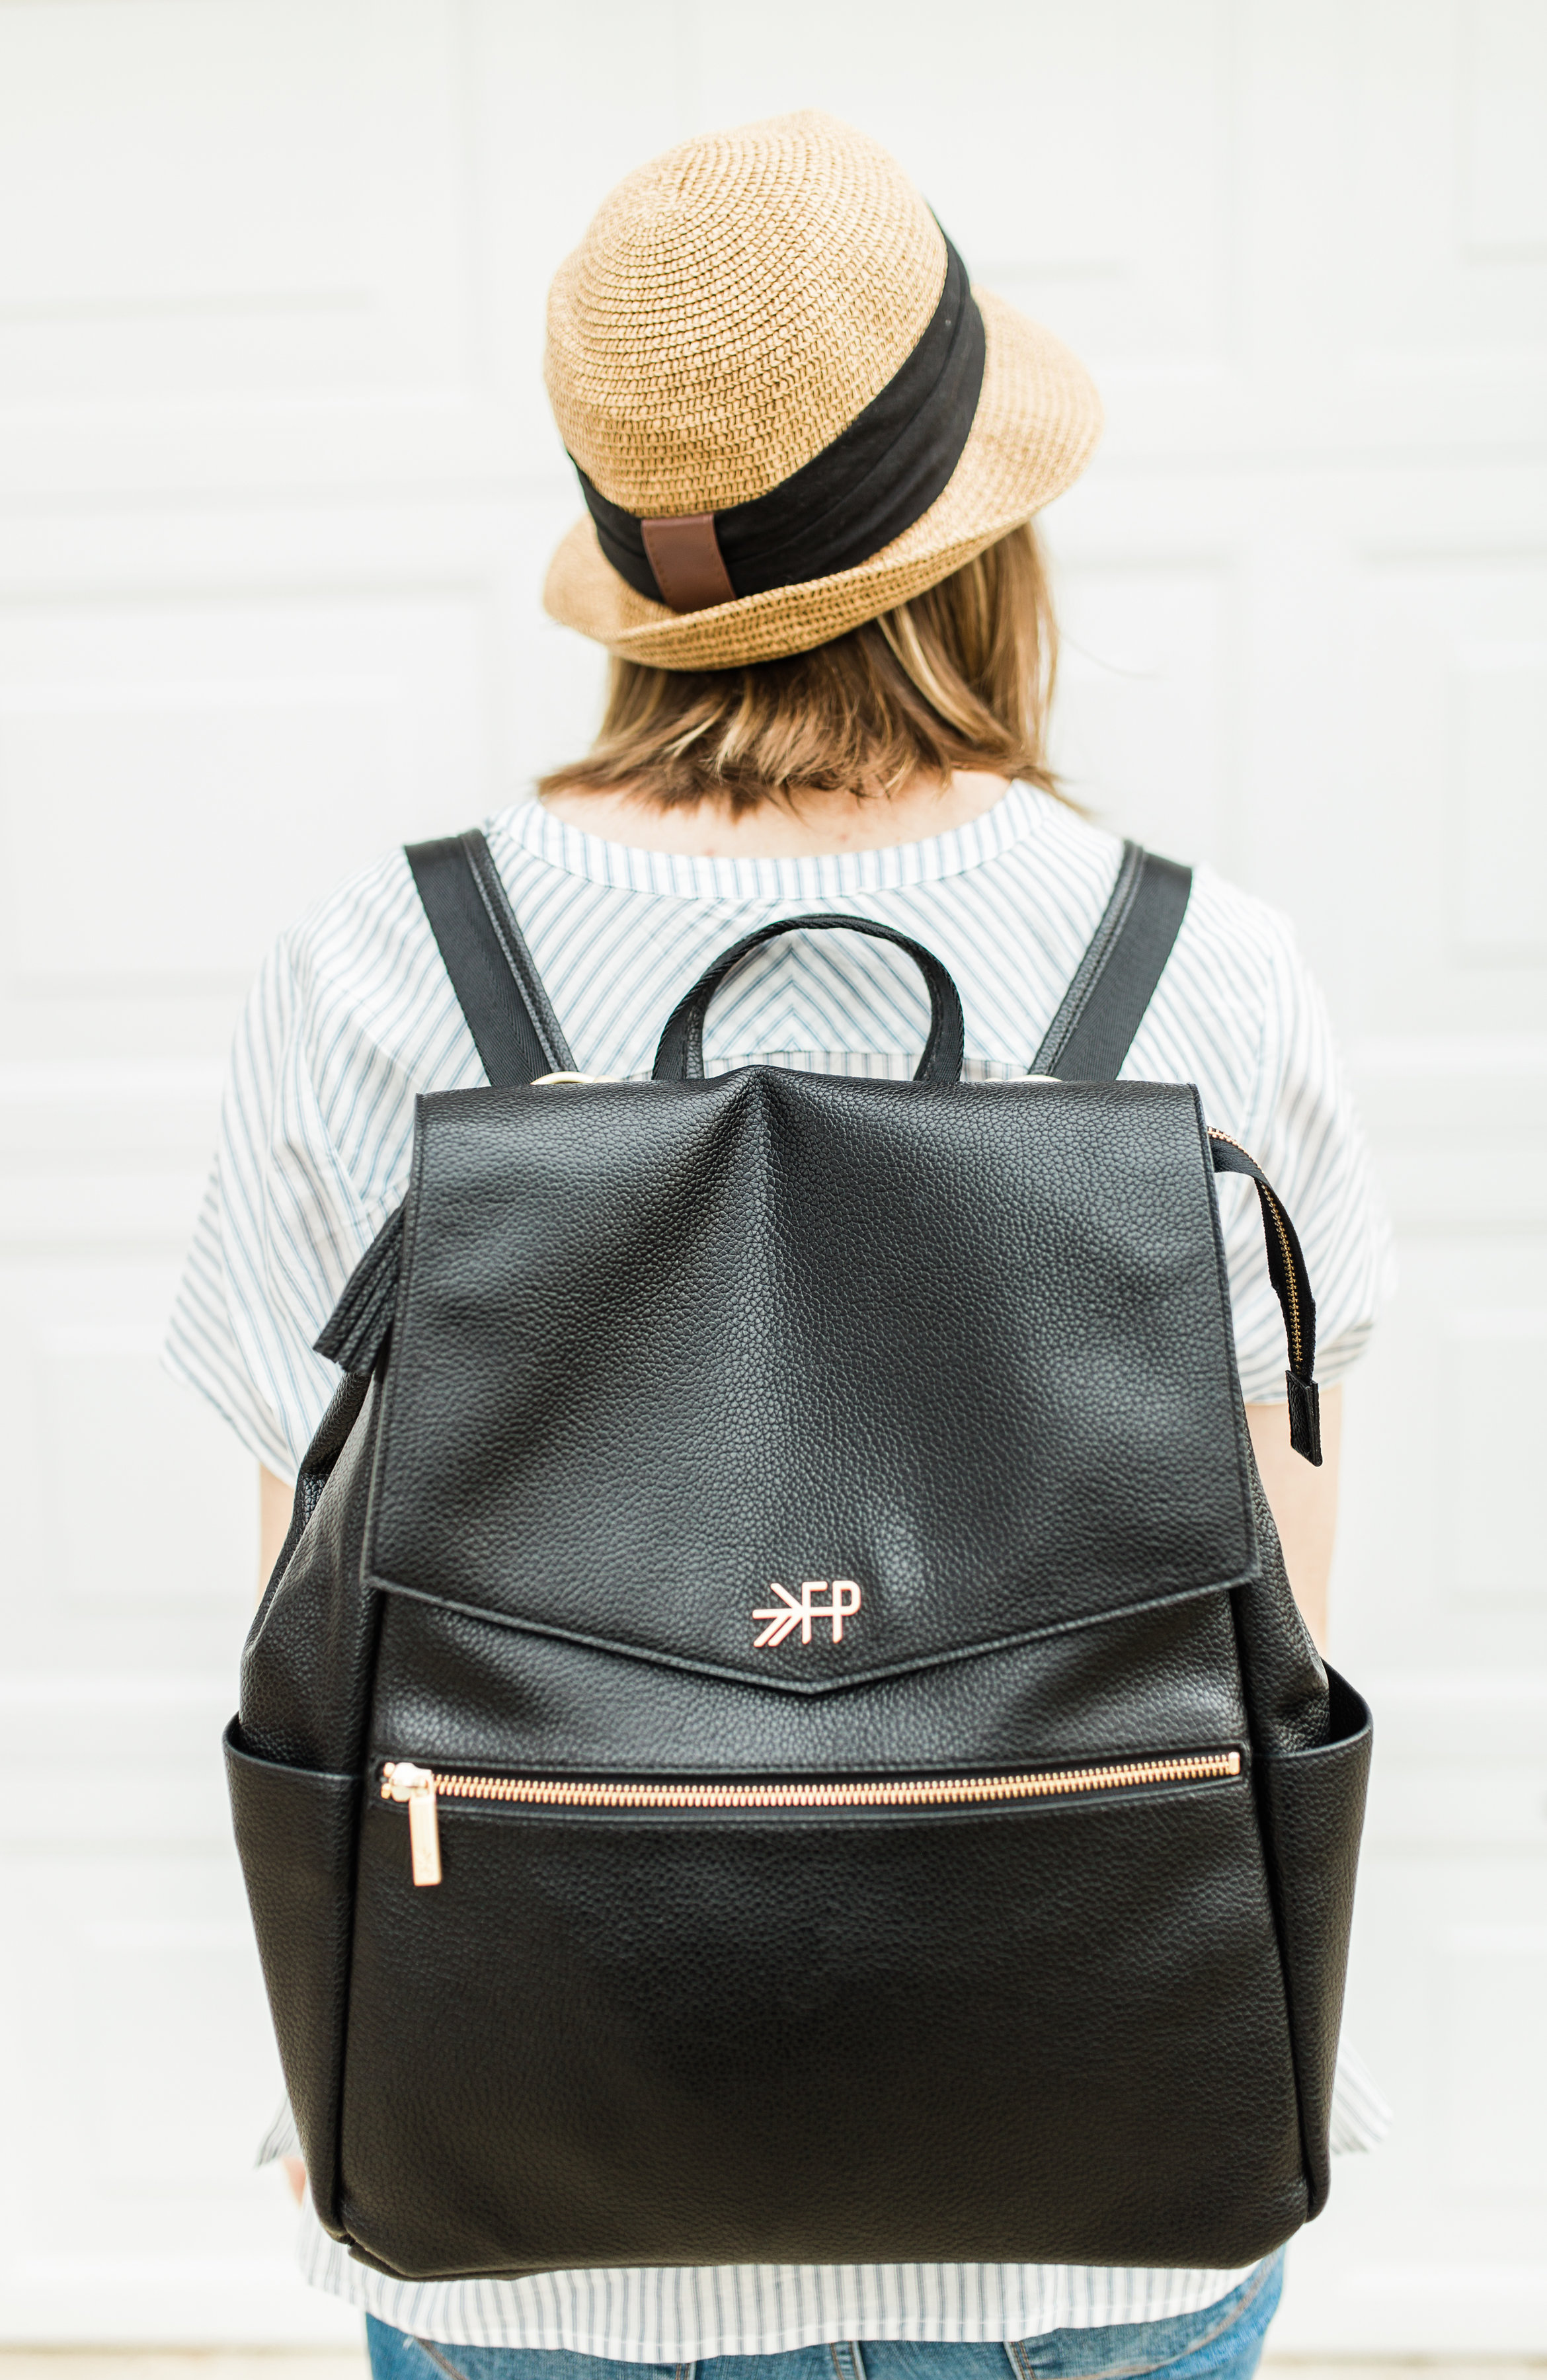 An honest review of the Freshly Picked Diaper Bag as a mom of a toddler and a baby. (The Perfect Option for Stylish, On-the-Go Moms) | glitterinc.com | @glitterinc - Freshly Picked Diaper Bag review by popular North Carolina style blogger Glitter, Inc.